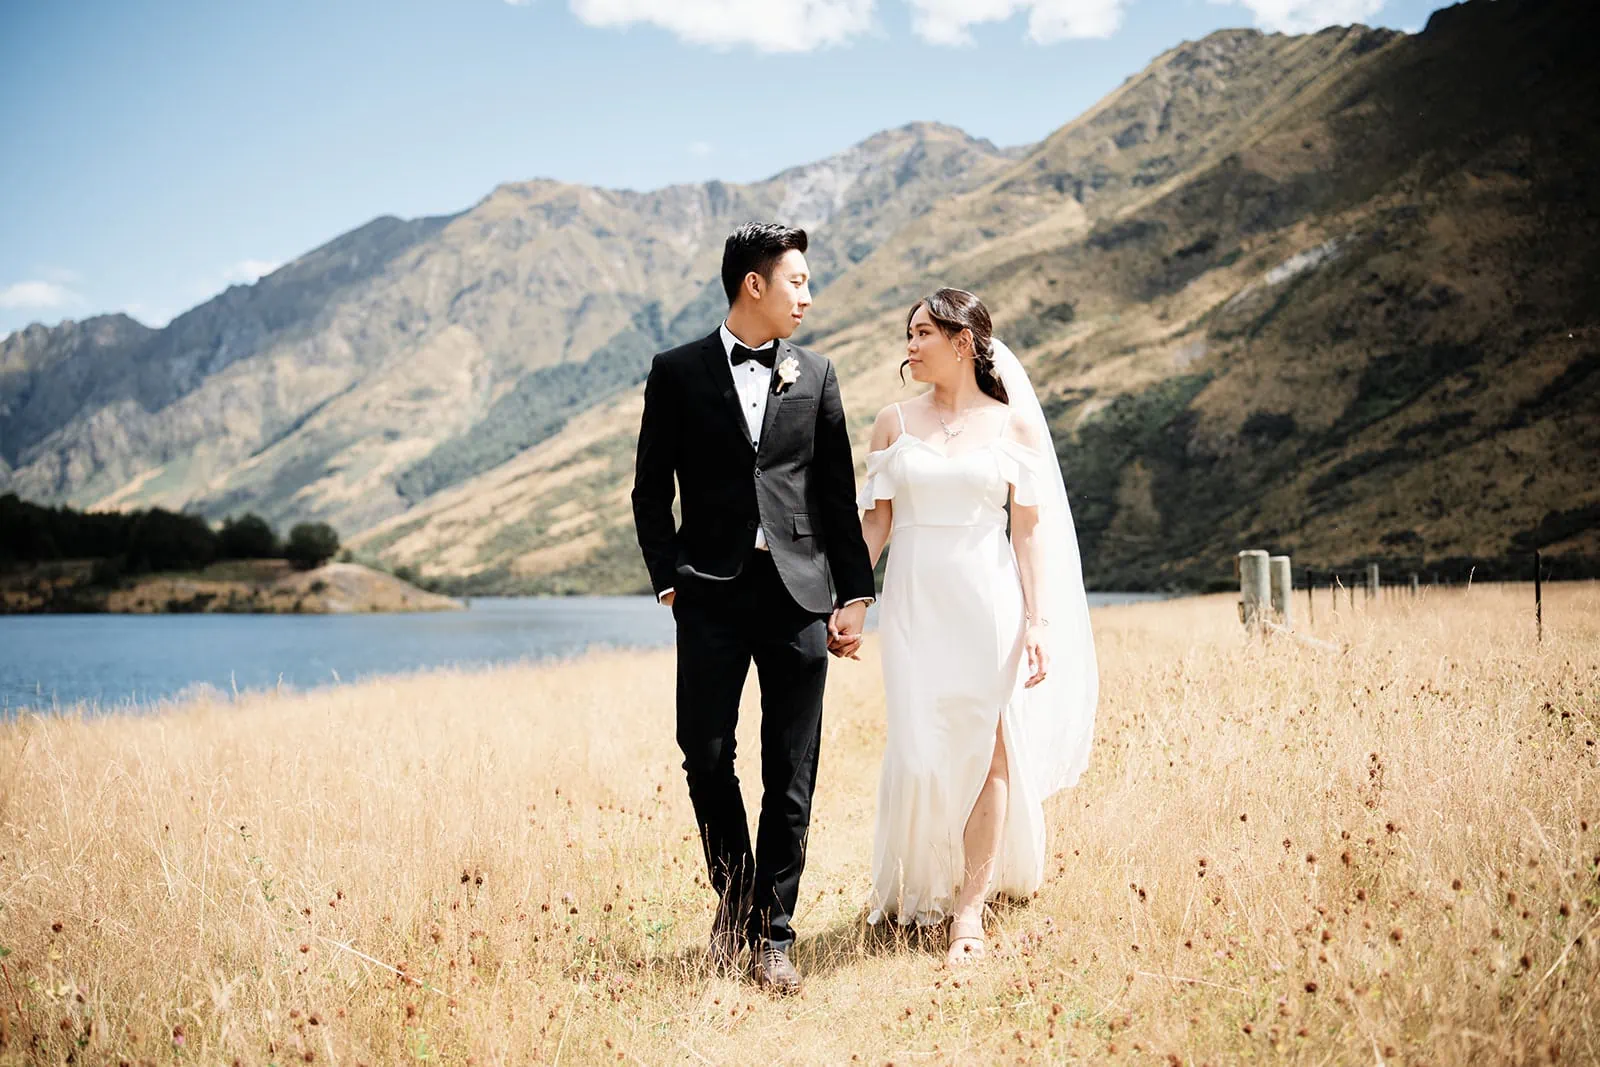 Dios and Carlyn at Cecil Peak, Queenstown - a couple standing in a field near a lake for their stunning pre-wedding photoshoot.